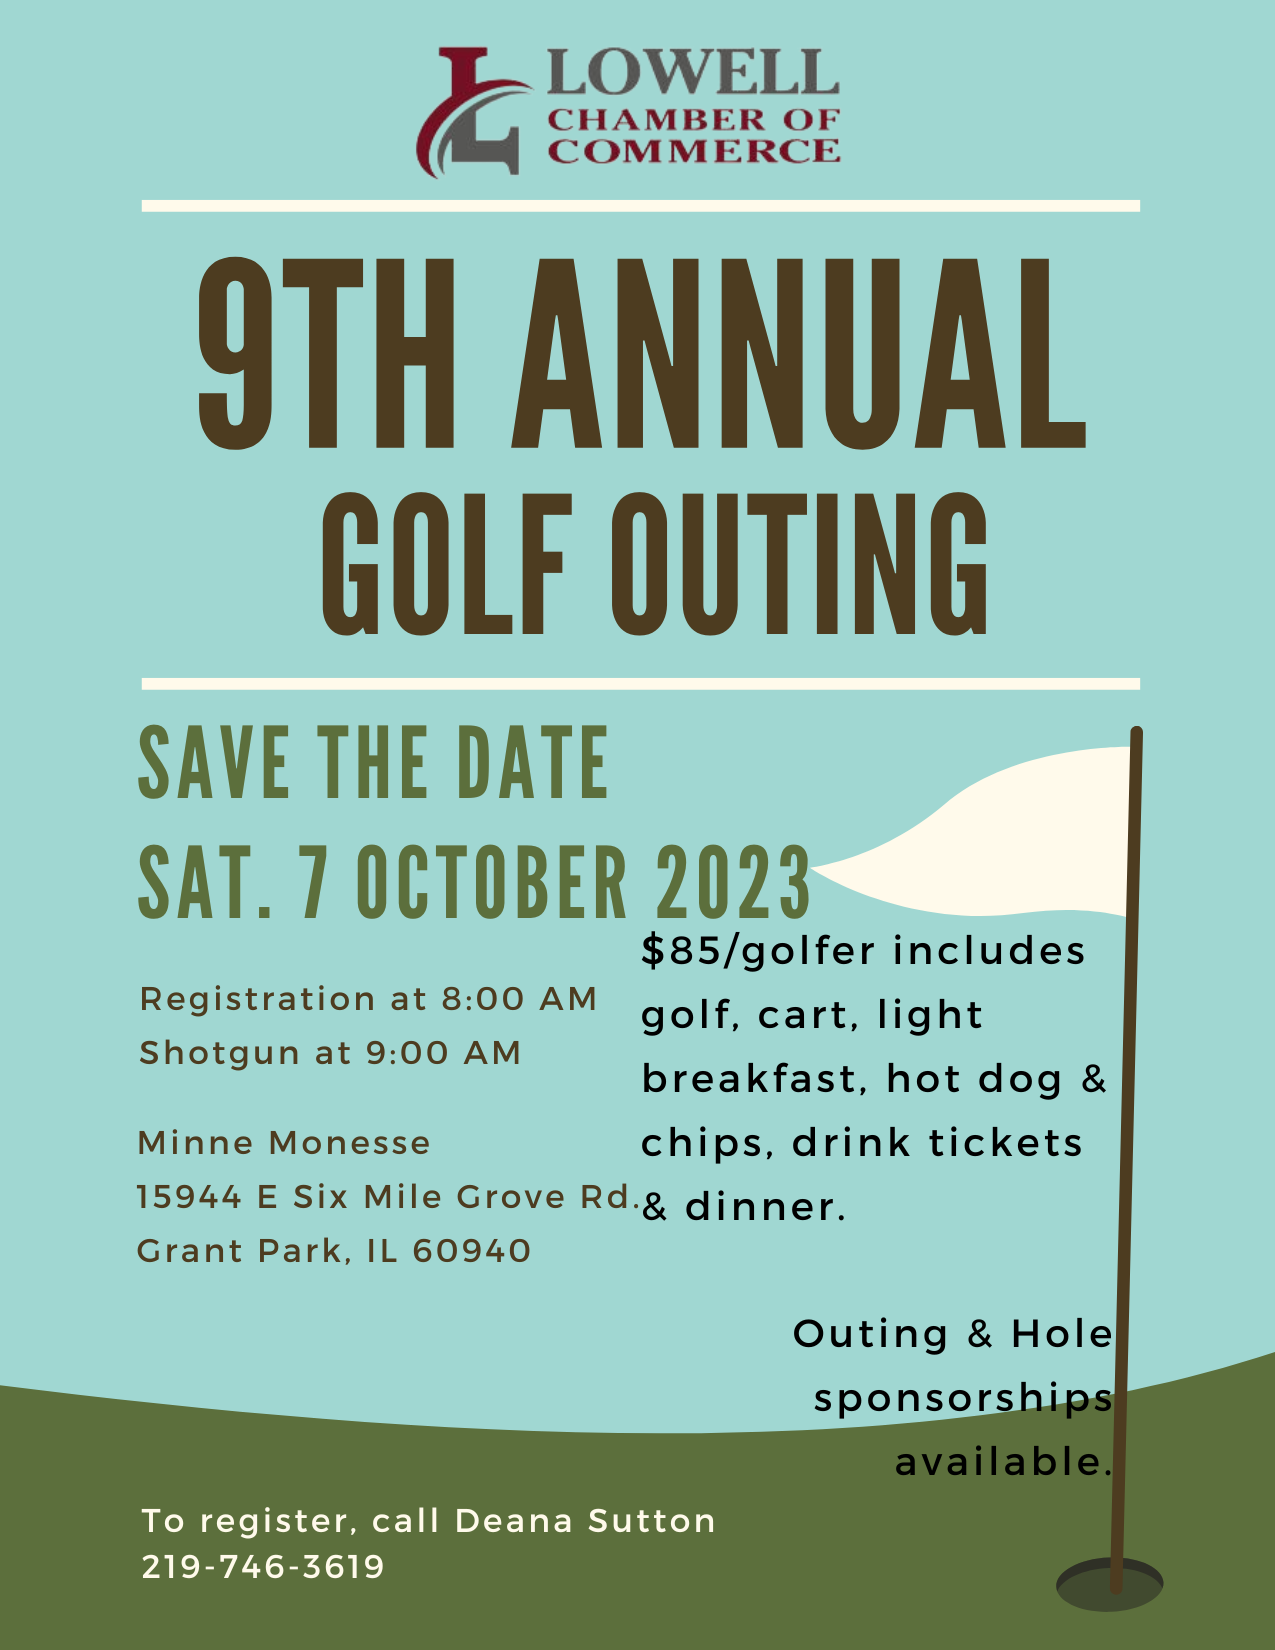 Lowell Chamber of Commerce 9th Annual Golf Outing